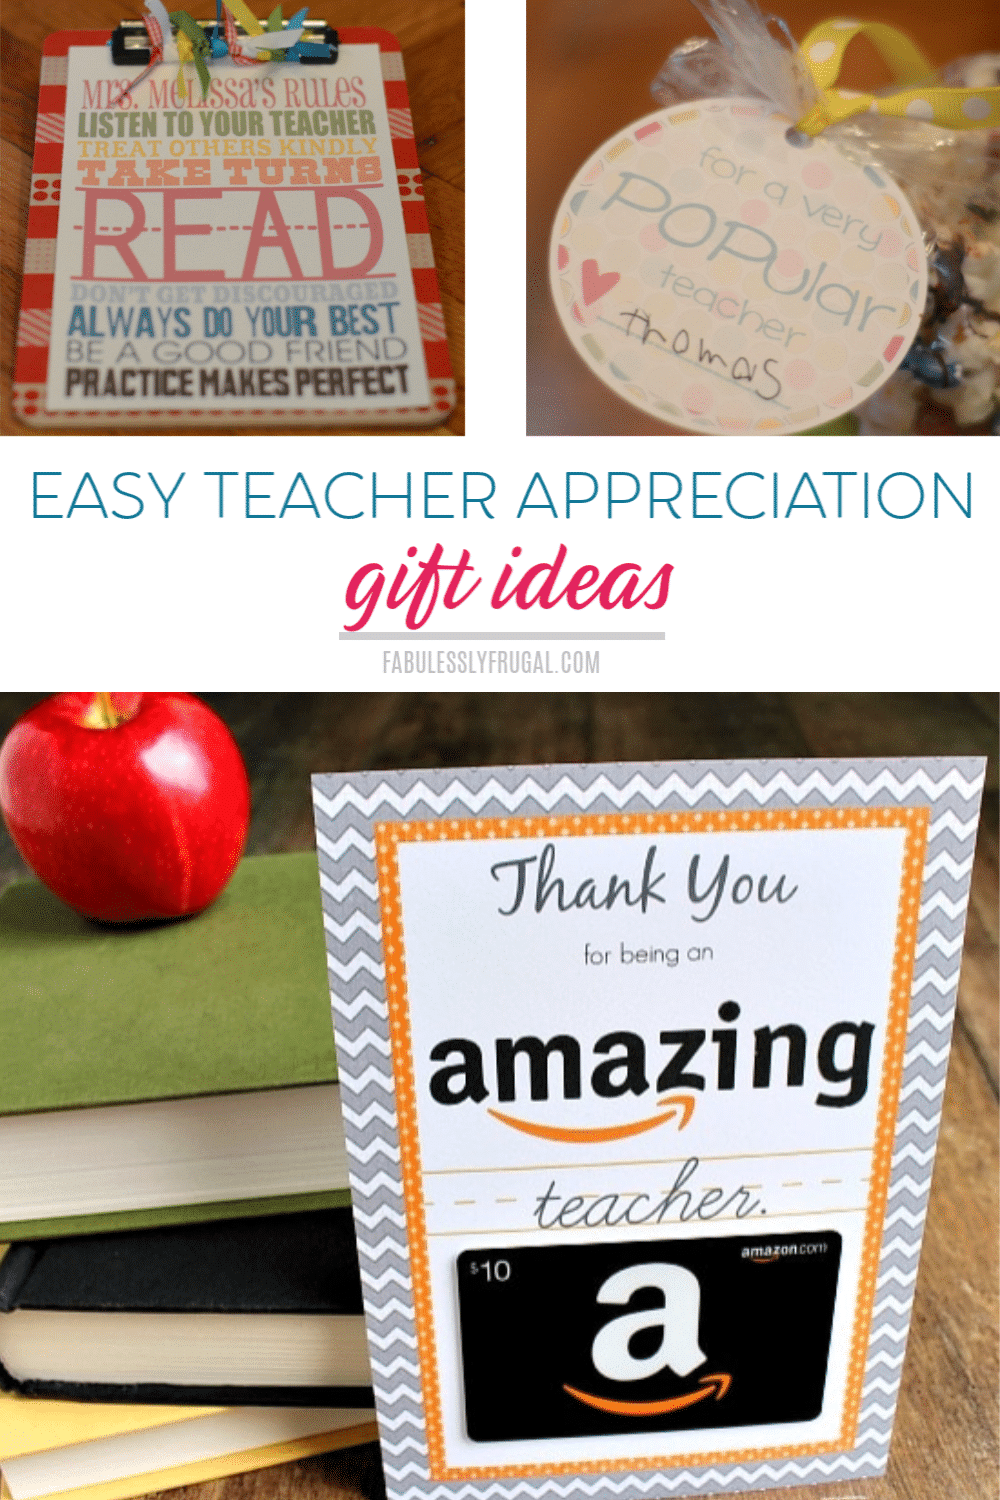 Quick and easy teacher appreciation gift ideas